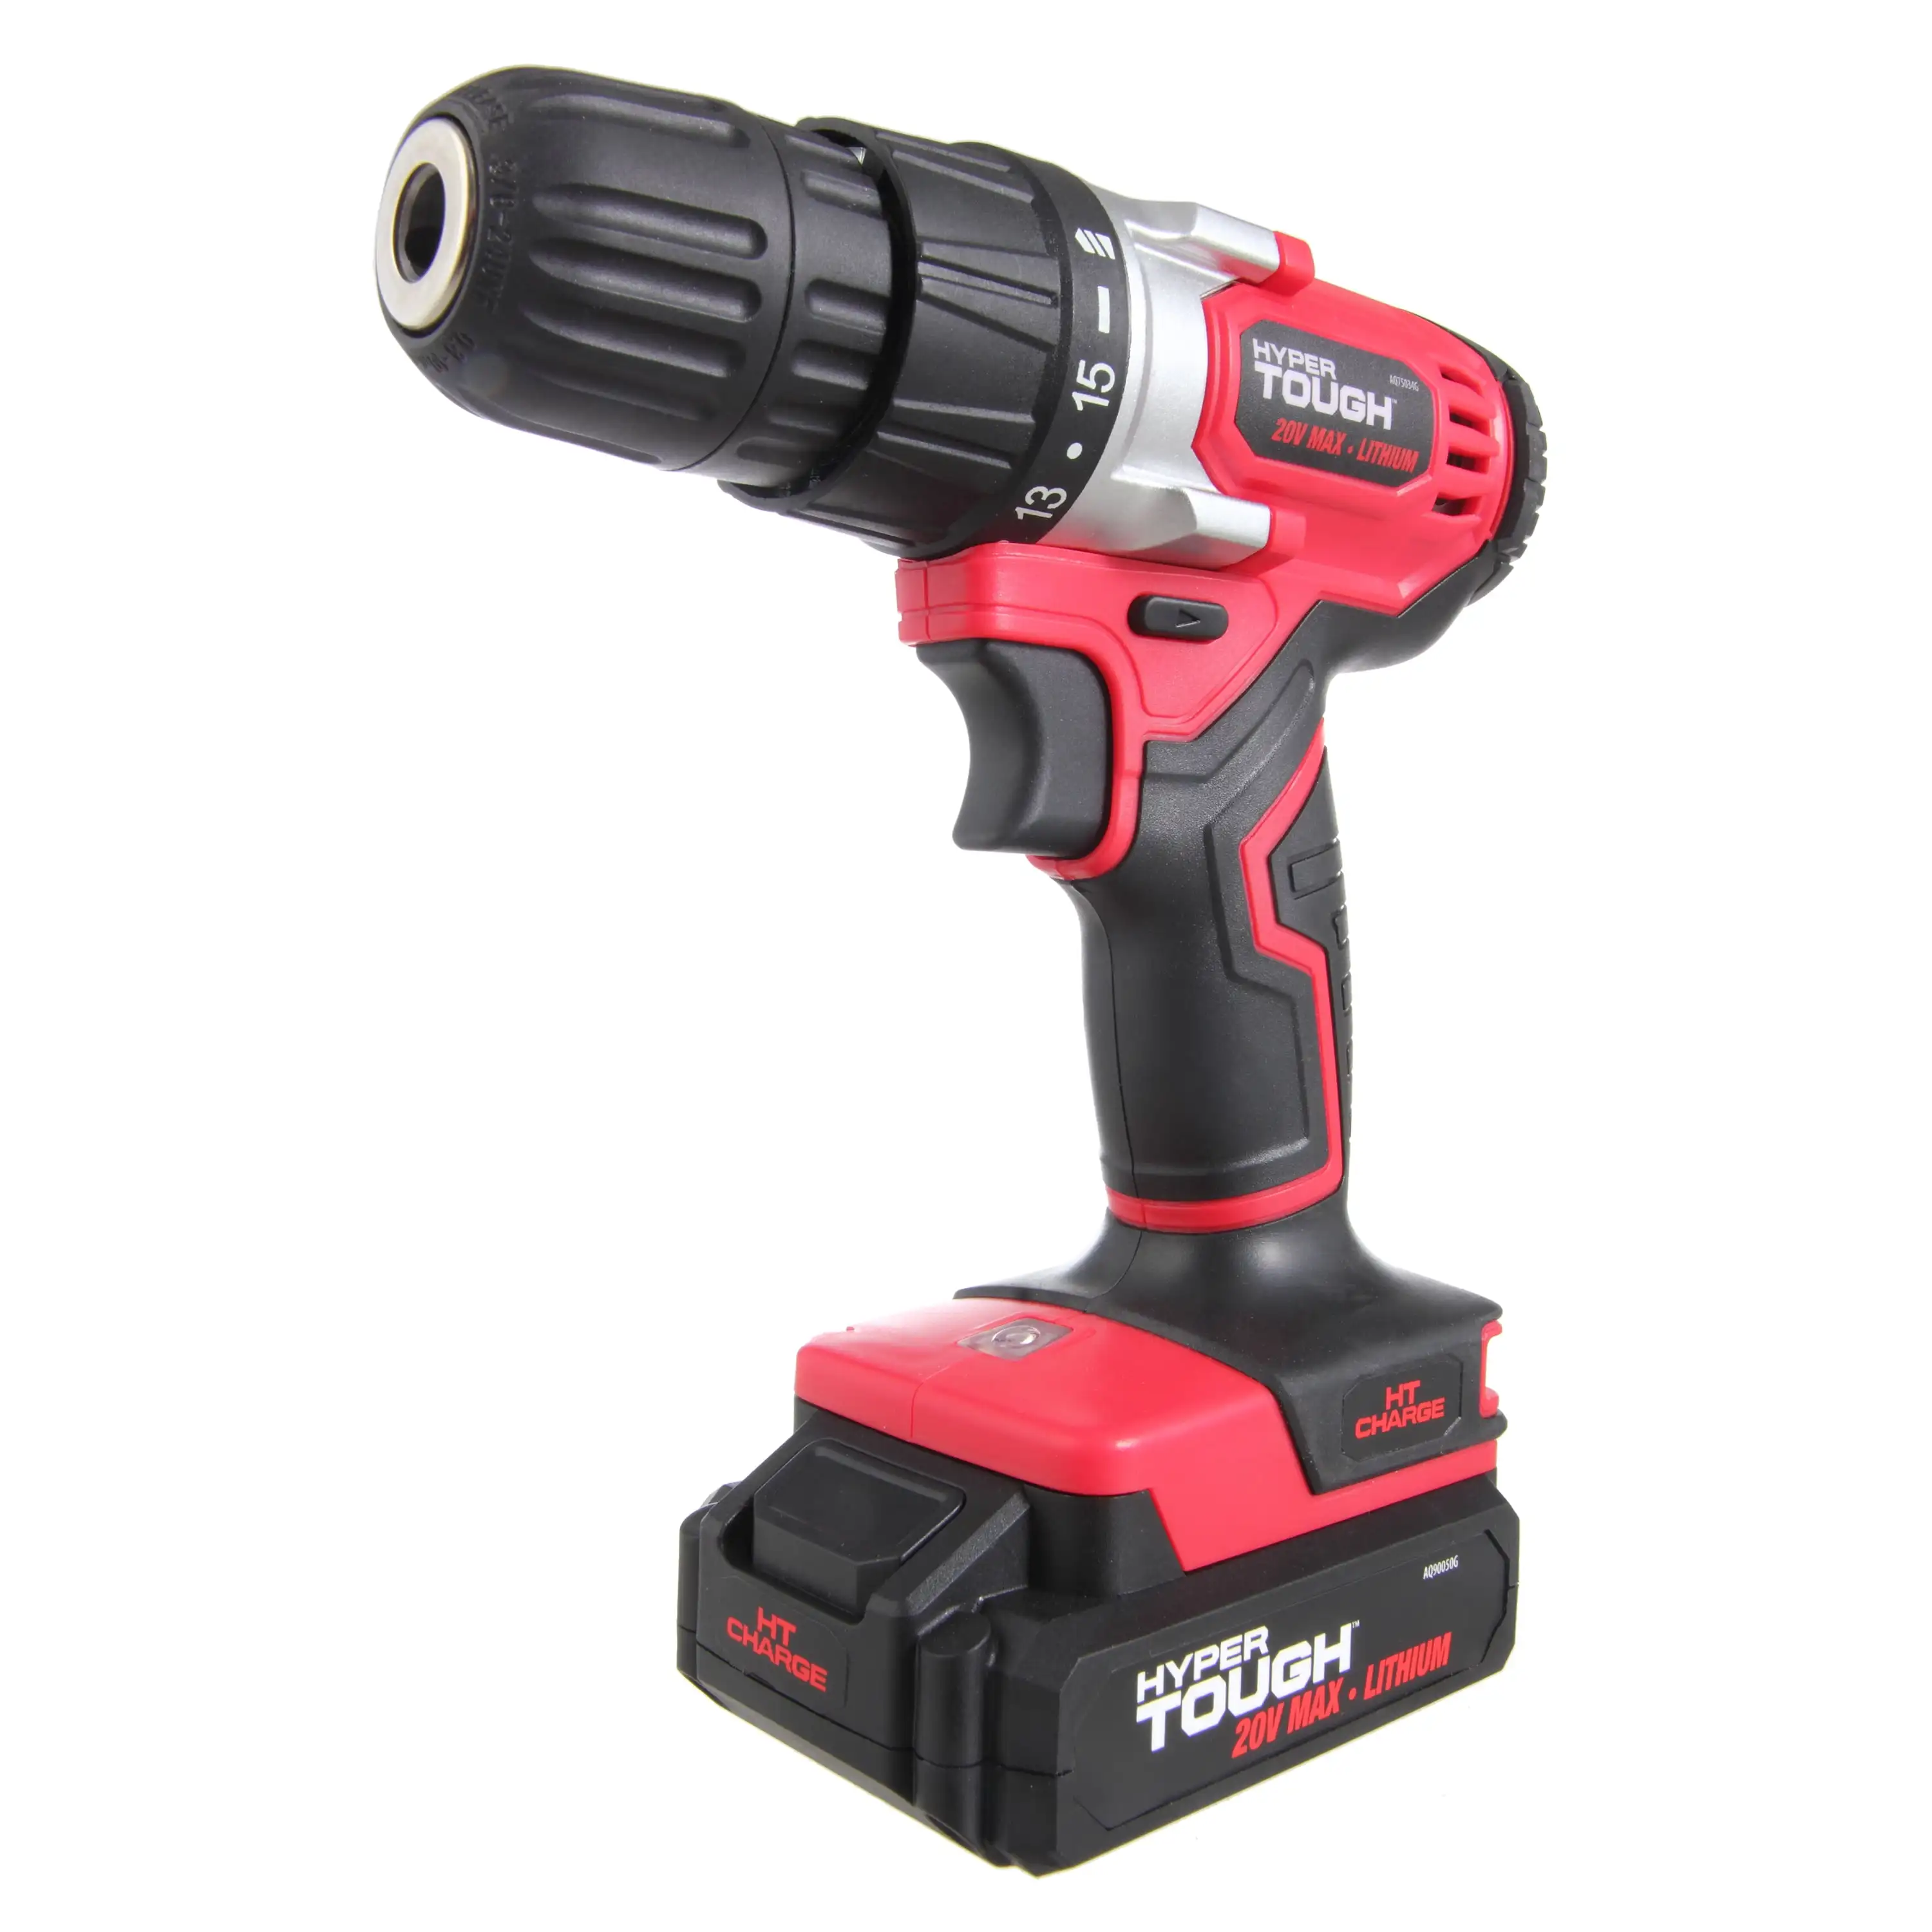 

Hyper Tough 20V Max Lithium-ion Cordless Drill, 3/8 inch Chuck, Variable Speed, with 1.5Ah Lithium-ion Battery